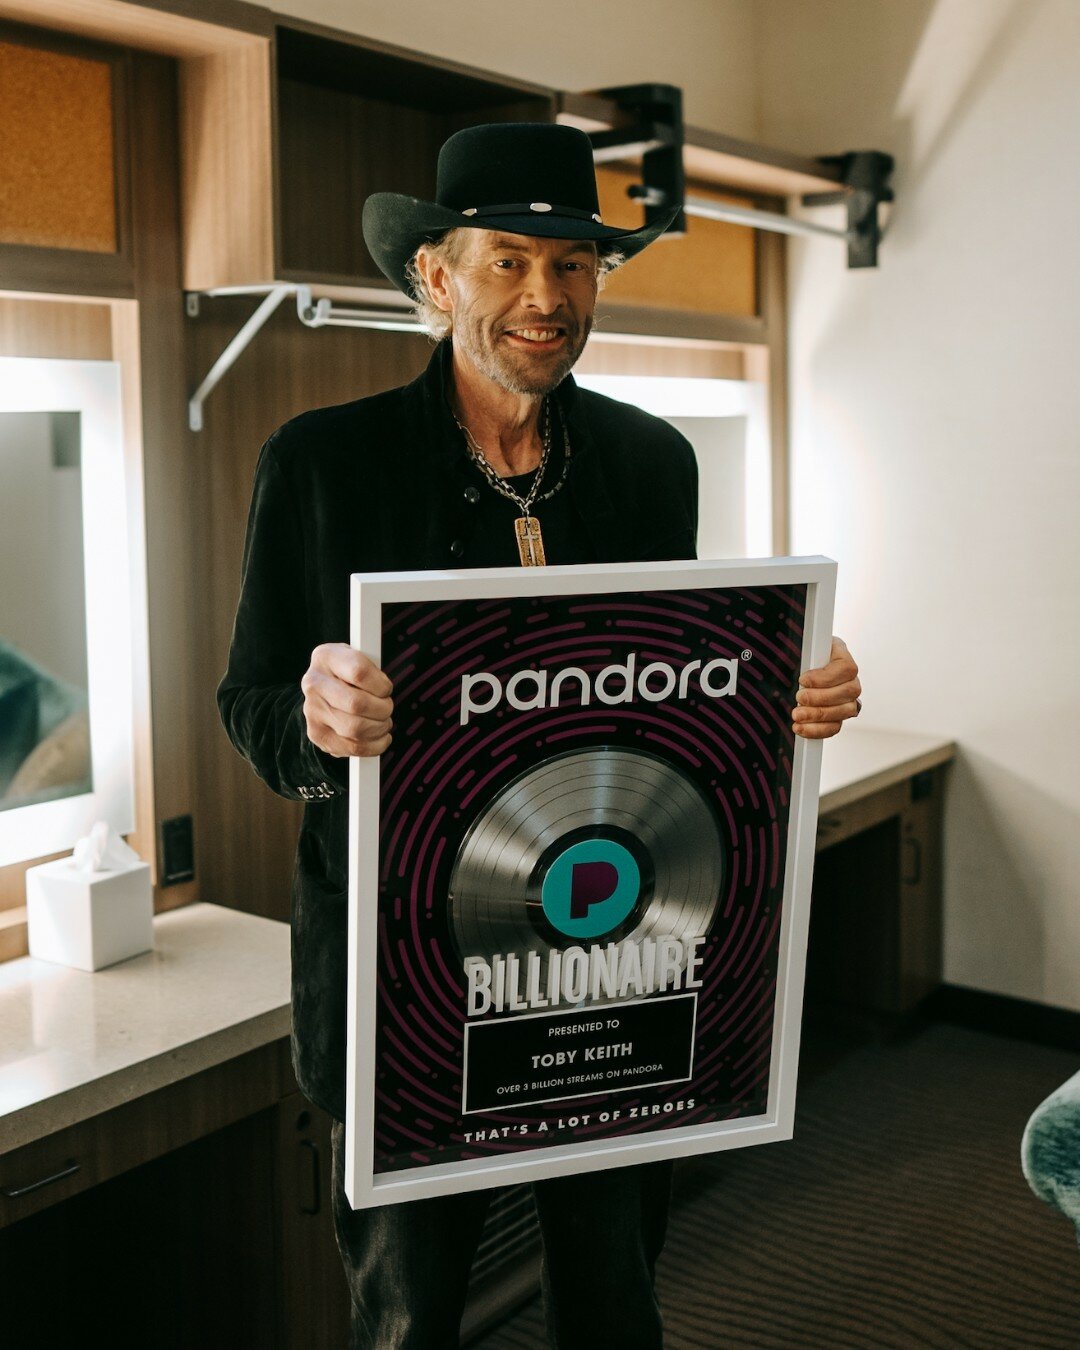 Toby Keith was recognized by Pandora for his music having been streamed 3 billion times on the music platform.